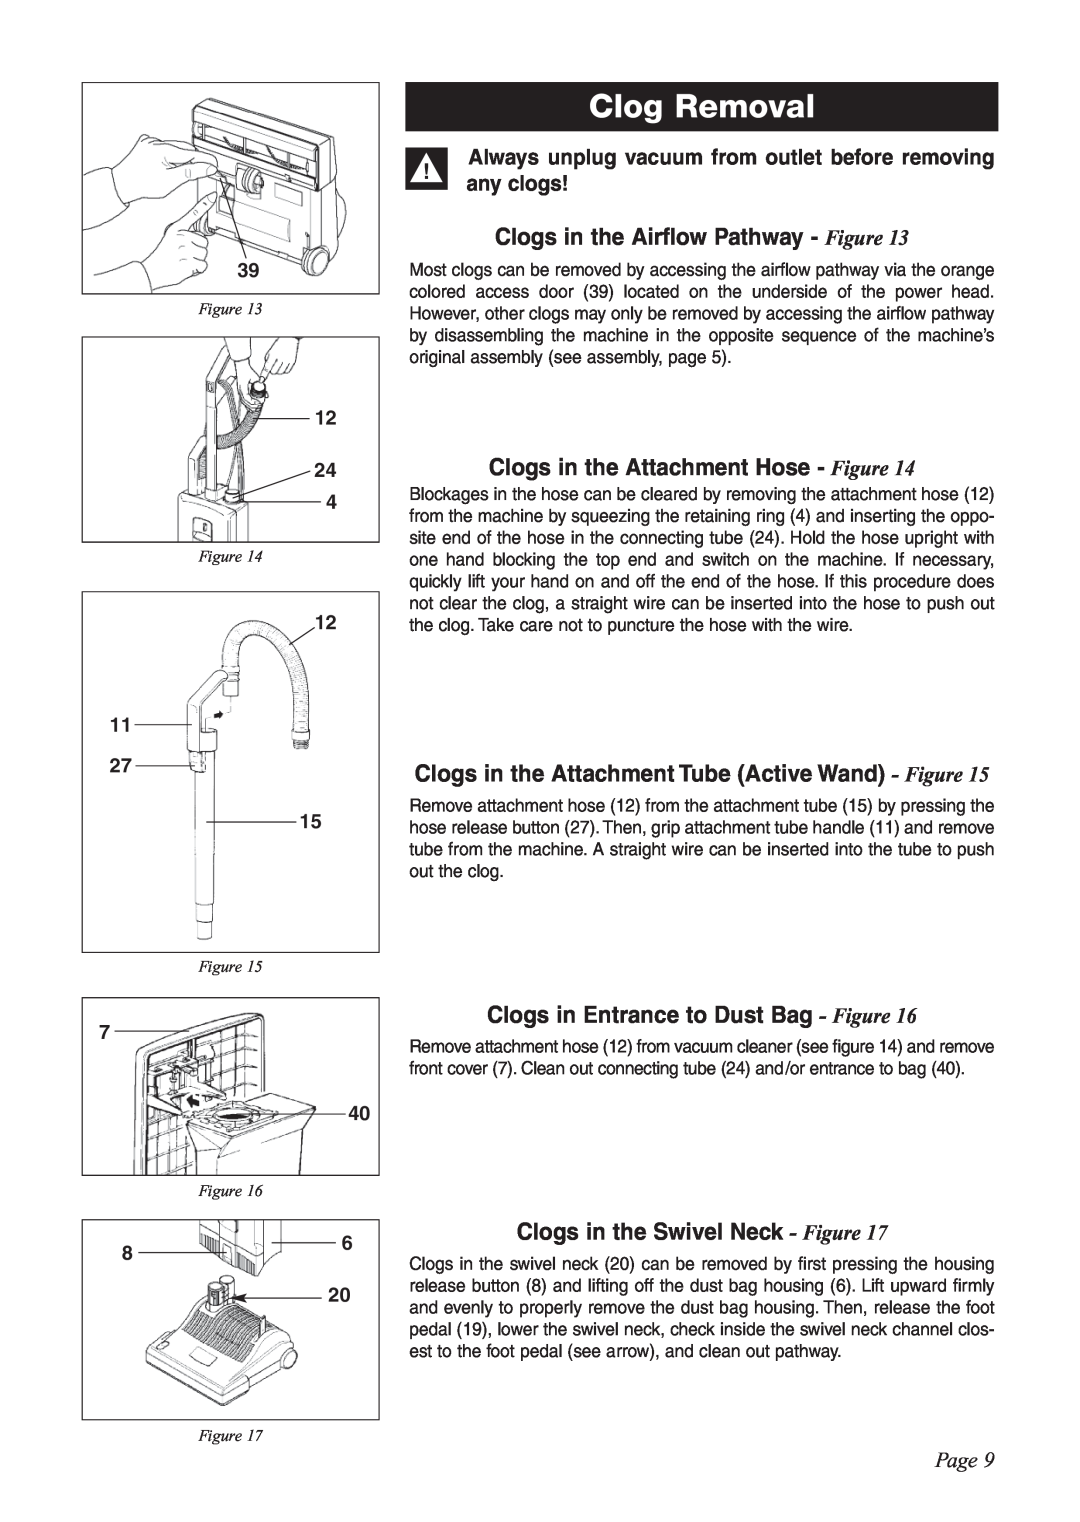 Sebo G-SERIES manual Clogs in the Airflow Pathway - Figure, Clogs in the Attachment Hose - Figure, Clog Removal, Page 